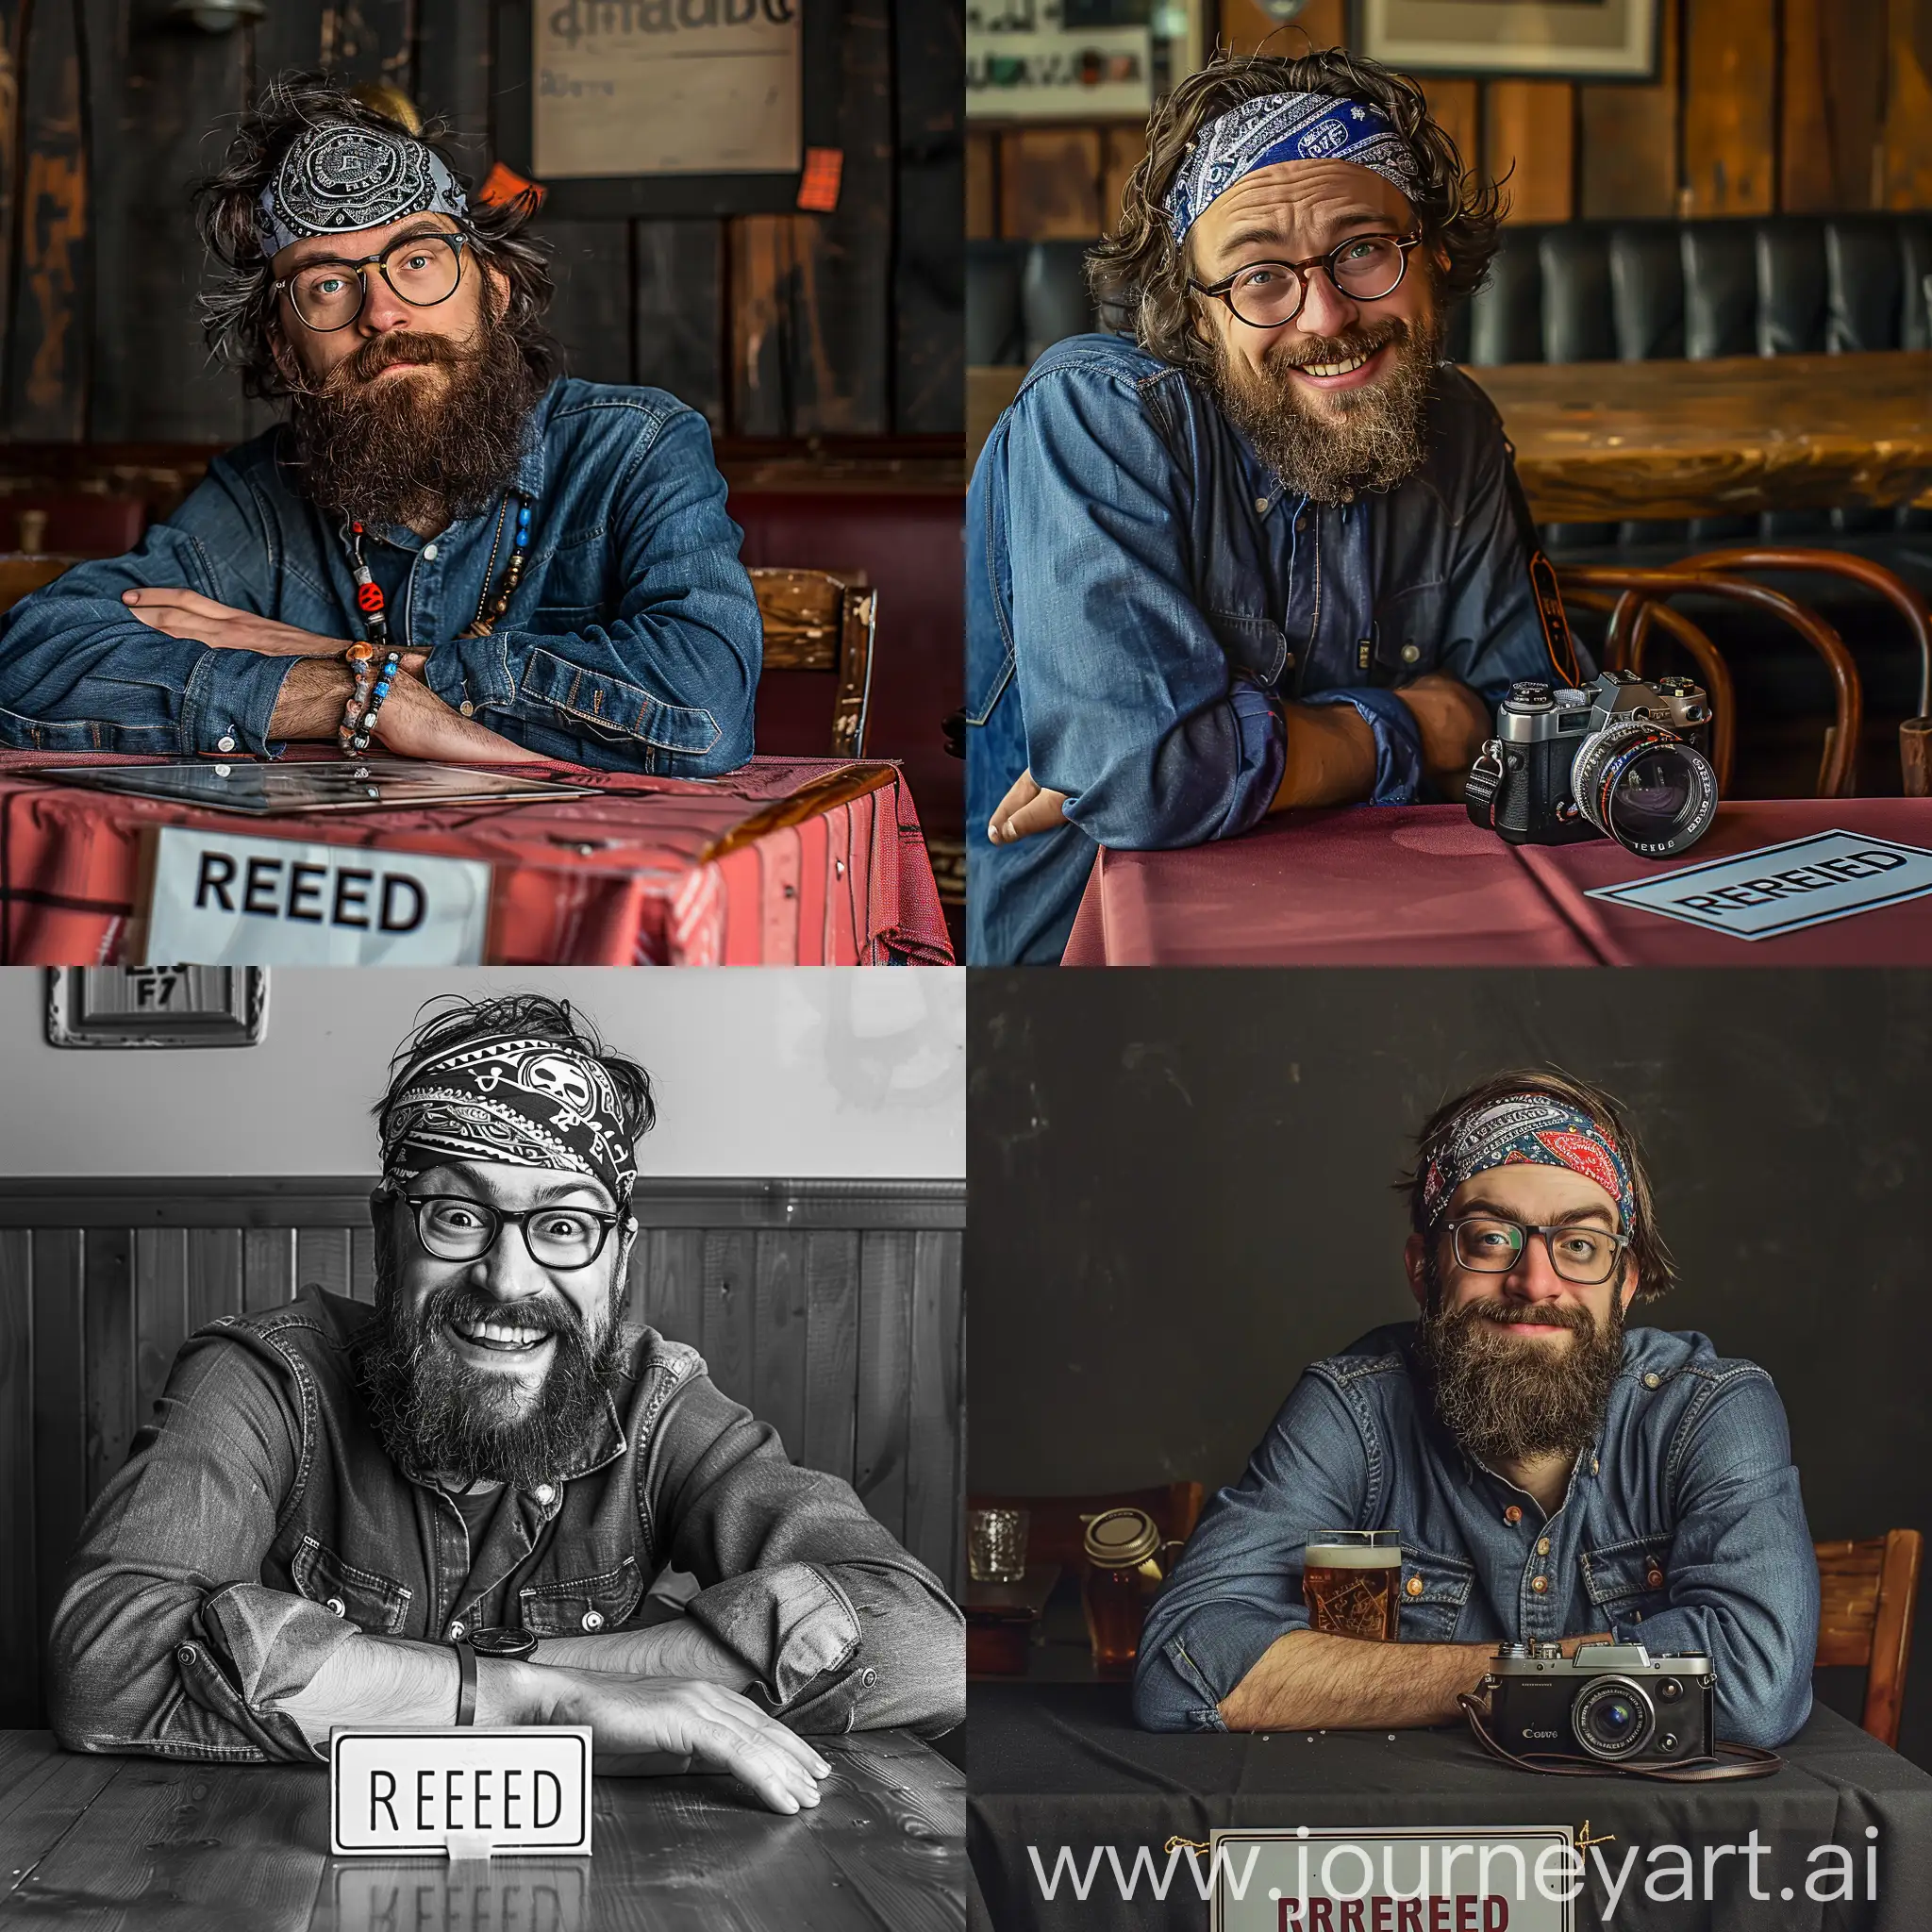 2015, photo, realistic, photograph, realism, real camera, man, beard, glasses, bandana on head, goofy face, sat at a pub table, reserved sign underneath, professional photography